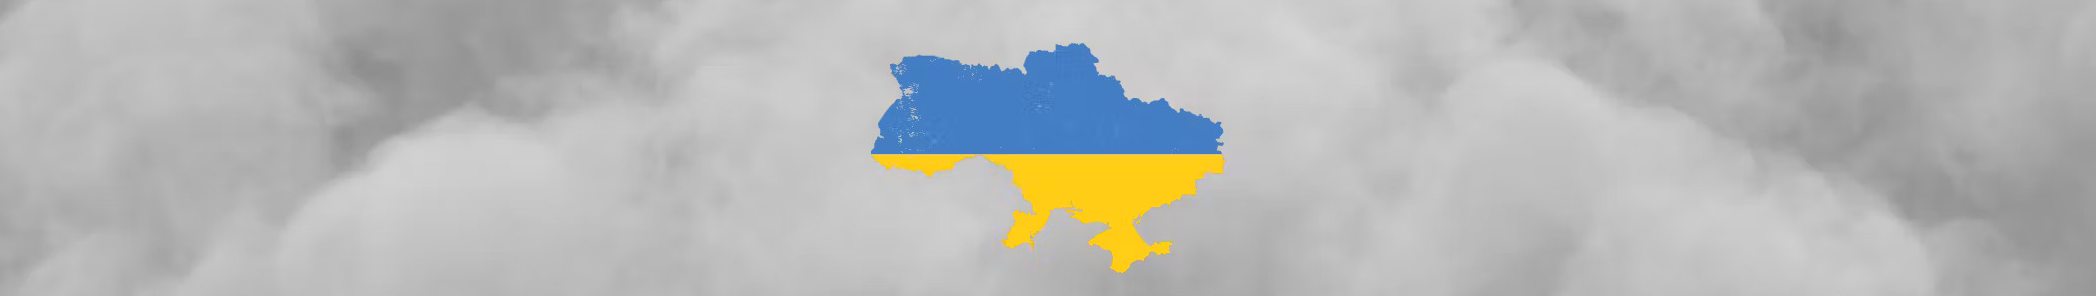 War Dust with Ukrainian Country Borders covered in the Colors of the National Flag of Ukraine